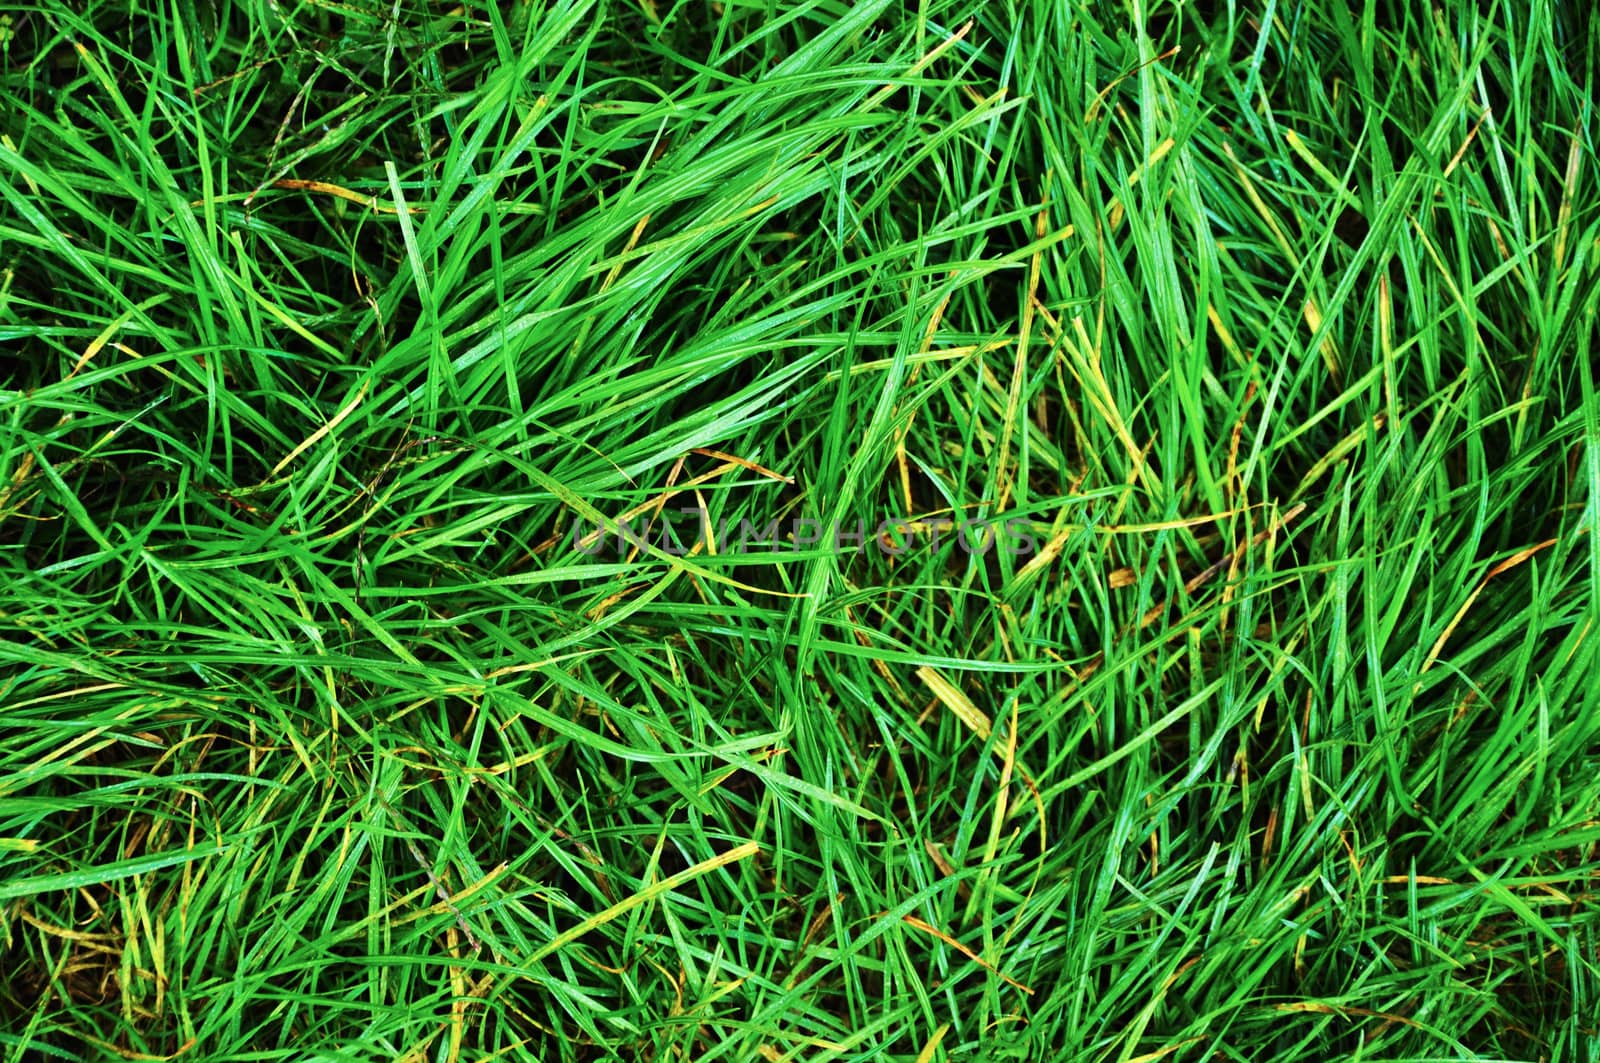 wet grass with intense shades of color and water droplets visible